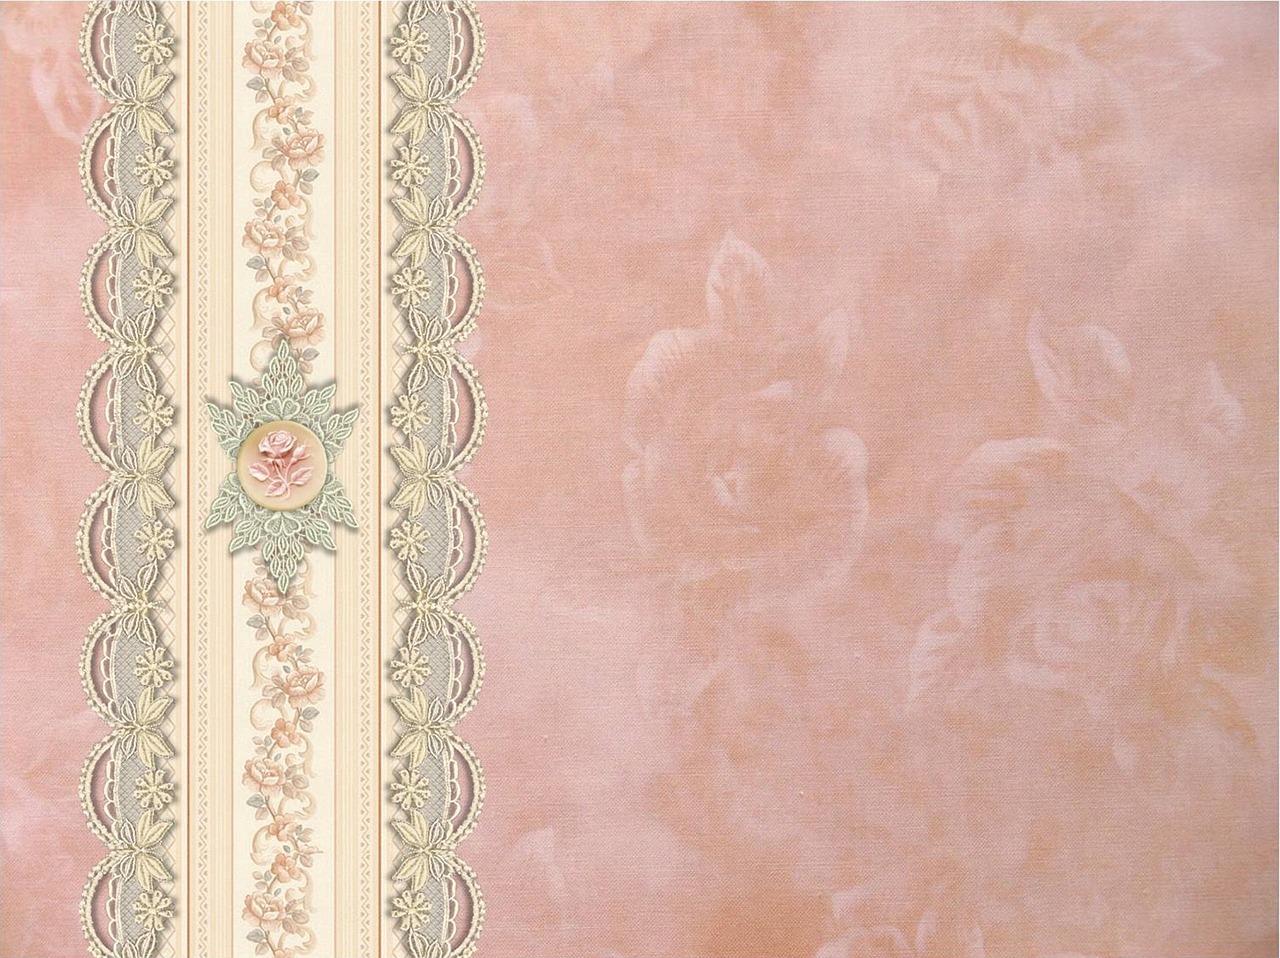 a close up of a wallpaper with a rose on it, a digital rendering, baroque, intricate border designs, light pink tonalities, metal lace, scrapbook